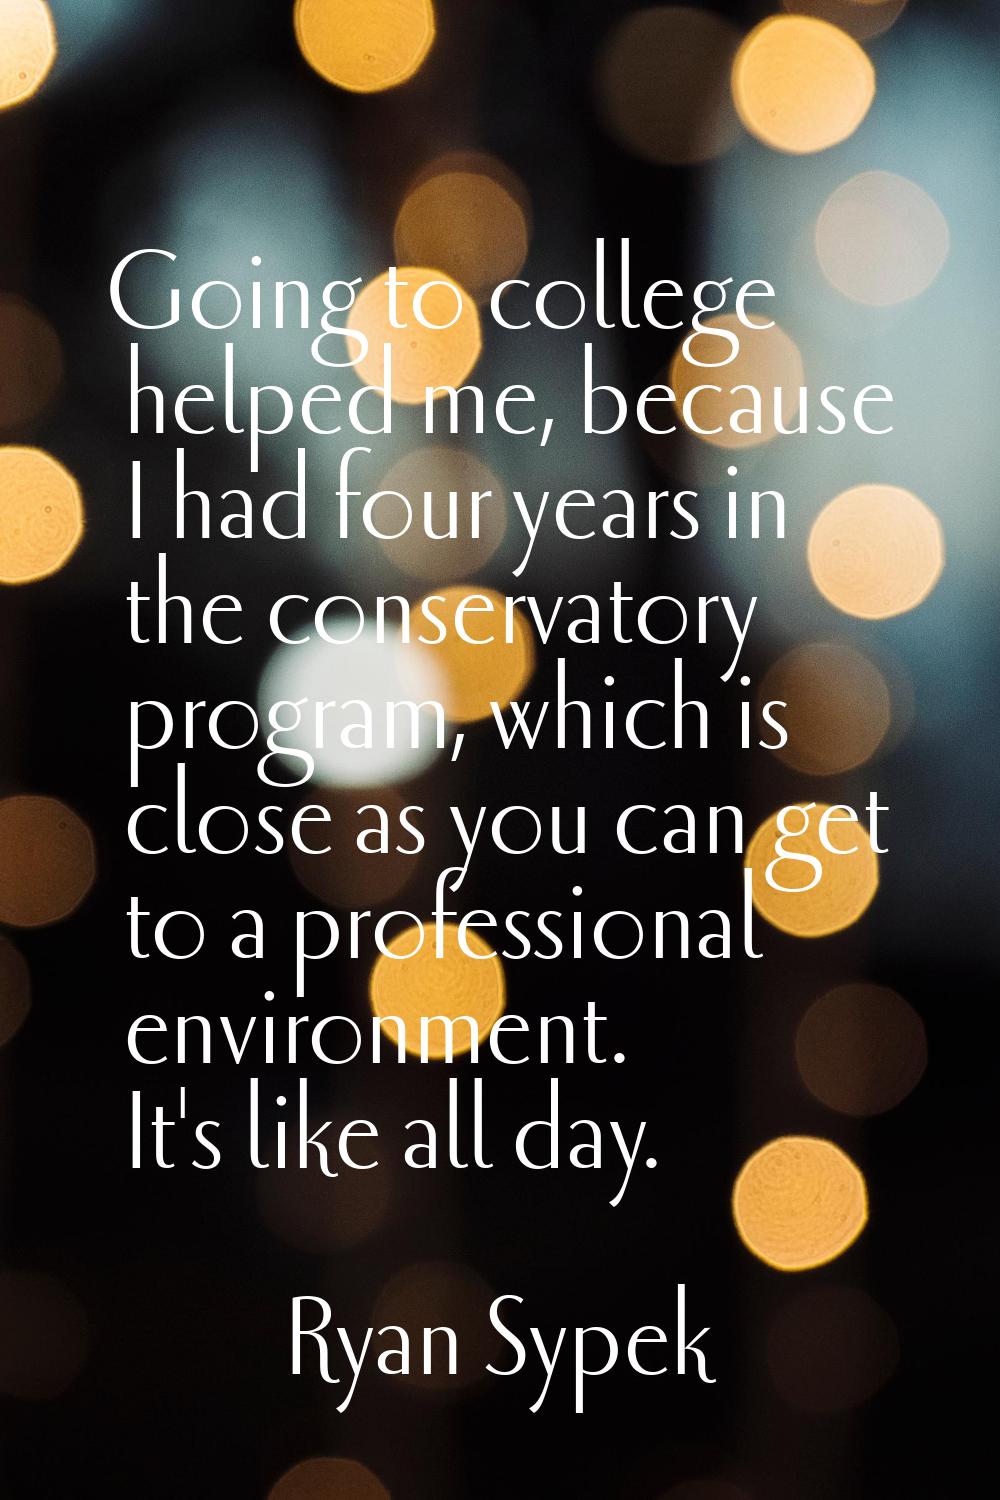 Going to college helped me, because I had four years in the conservatory program, which is close as